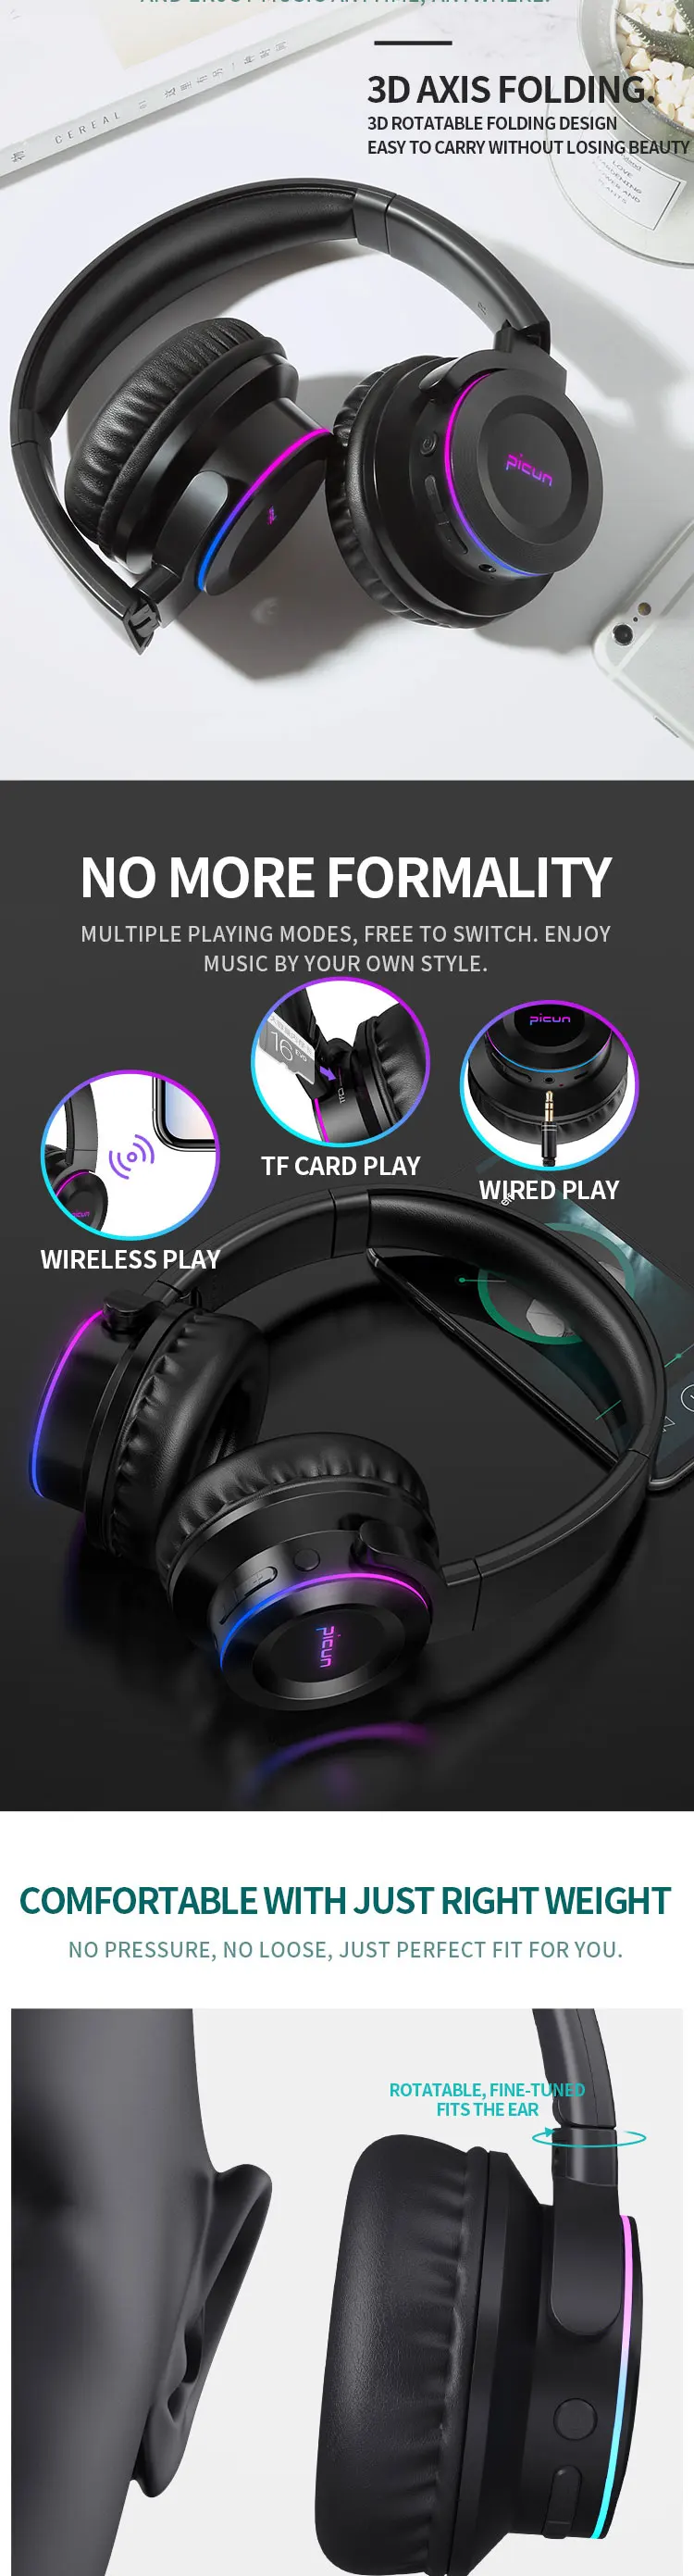 Picun B9 Foldable Rgb Touch Control Wireless 5.0 Bluetooth Stereo Headphone - Buy Headphones Stereo,Stereo Stereo Product on Alibaba.com